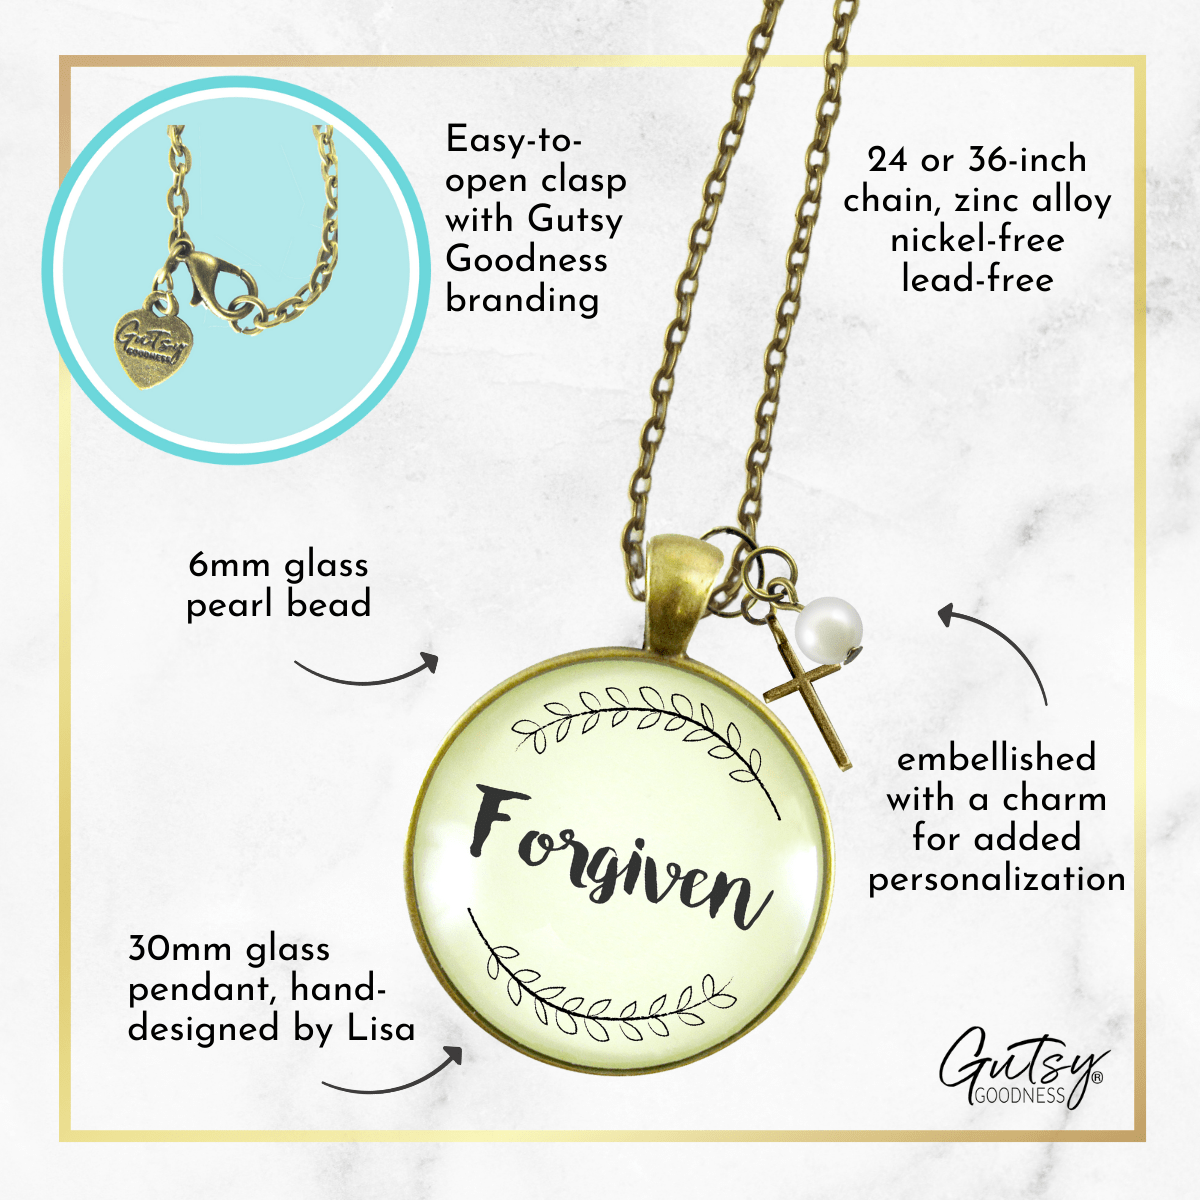 Gutsy Goodness Forgiven Necklace Faith Inspired Christian Womens Cross Charm Jewelry - Gutsy Goodness Handmade Jewelry;Forgiven Necklace Faith Inspired Christian Womens Cross Charm Jewelry - Gutsy Goodness Handmade Jewelry Gifts